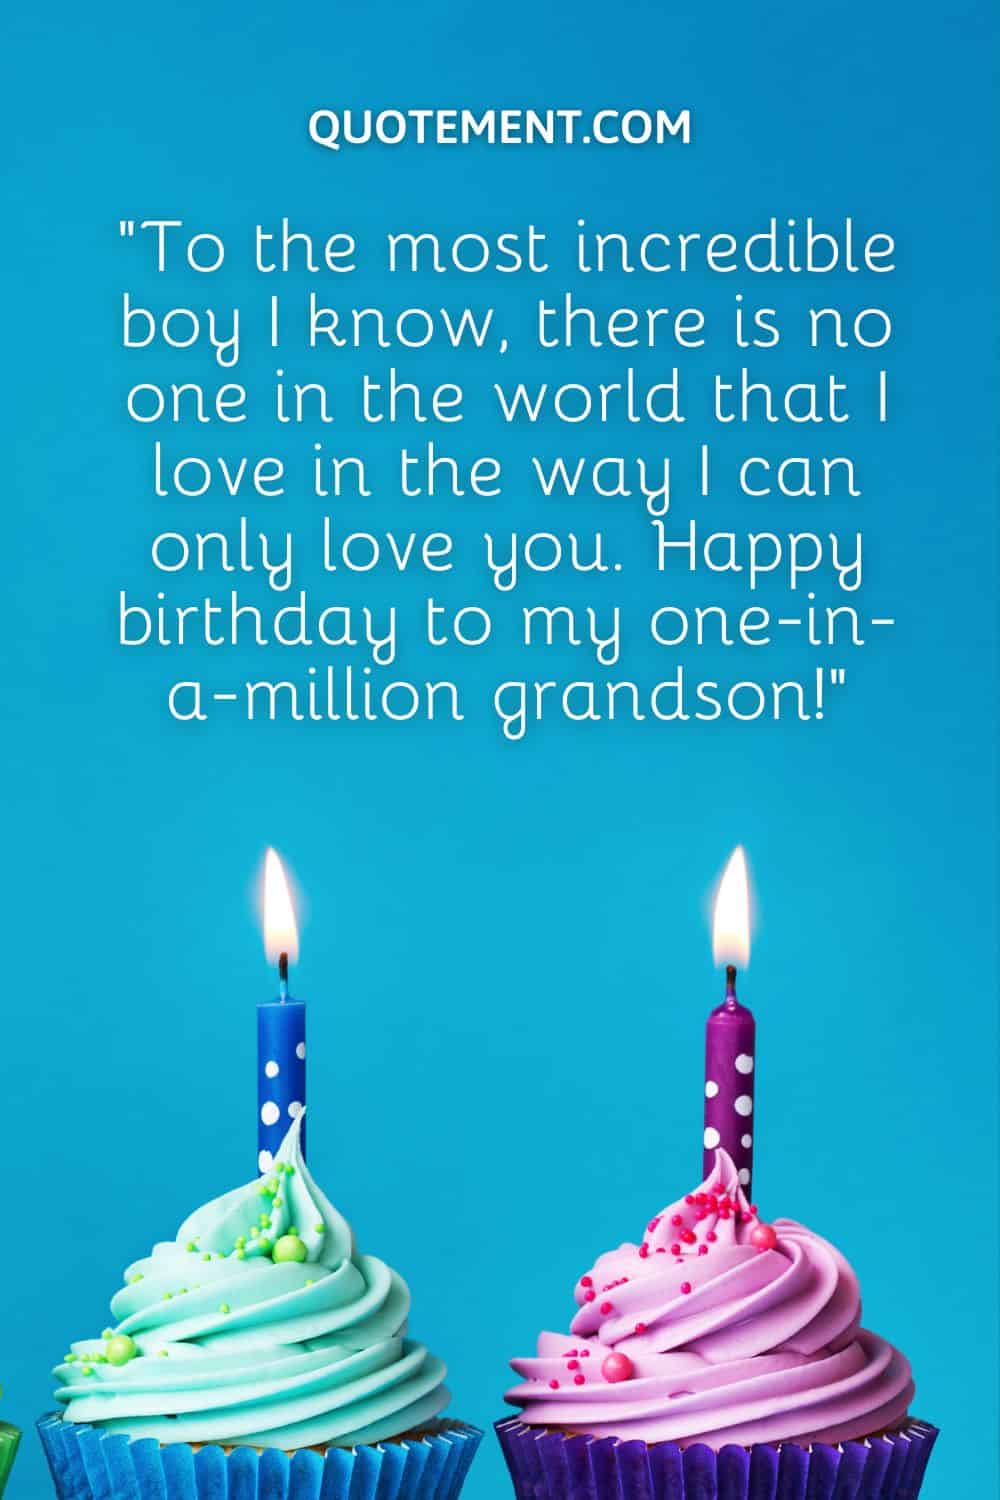 “To the most incredible boy I know, there is no one in the world that I love in the way I can only love you. Happy birthday to my one-in-a-million grandson!”